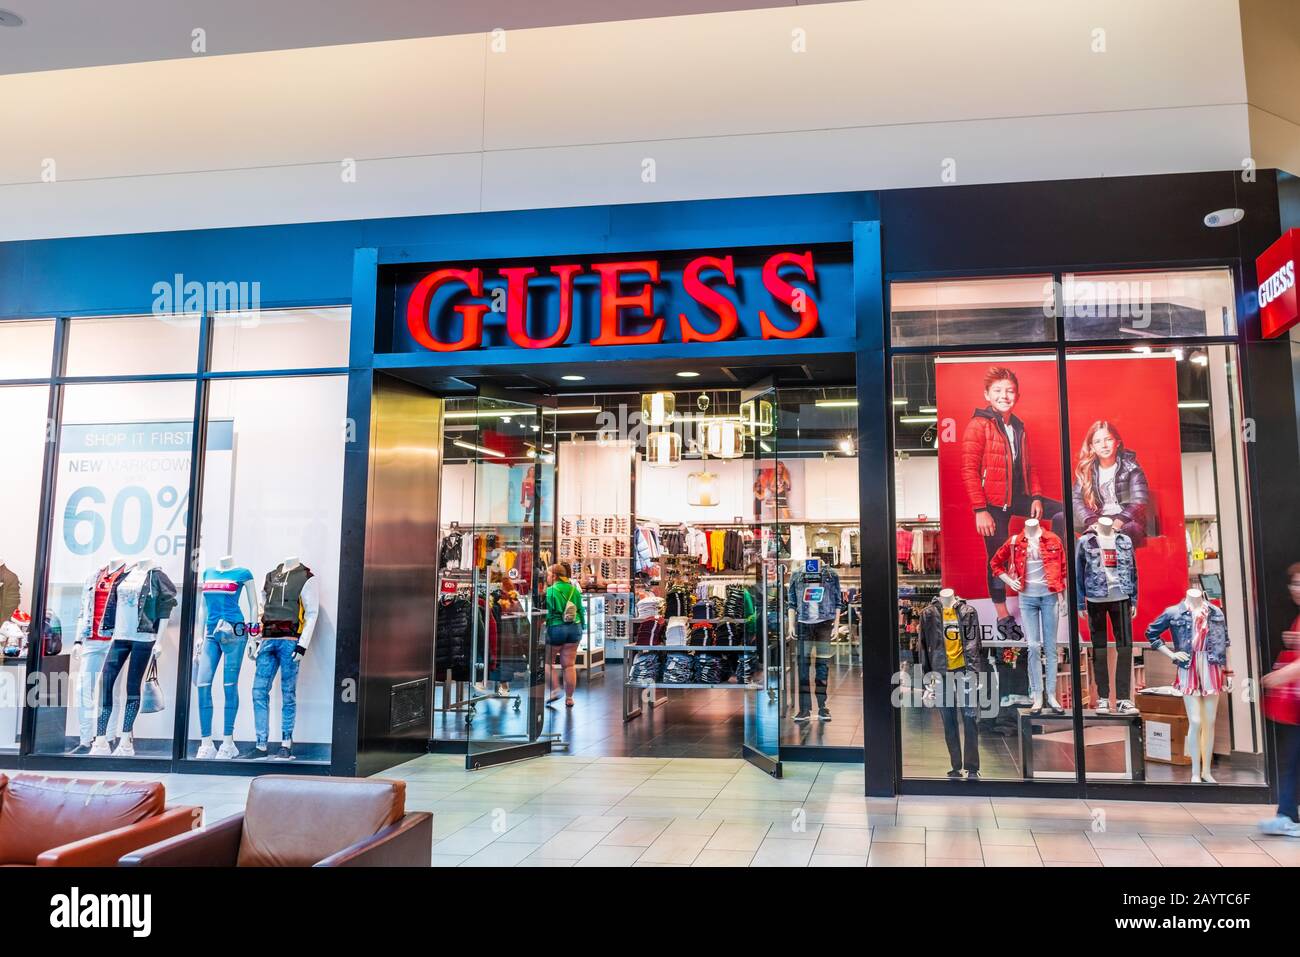 Tilstedeværelse grube Natur Jan 31, 2020 Milpitas / CA / USA - Guess store in a South San Francisco Bay  area mall; Guess (styled as GUESS or Guess?) is an American clothing brand  Stock Photo - Alamy